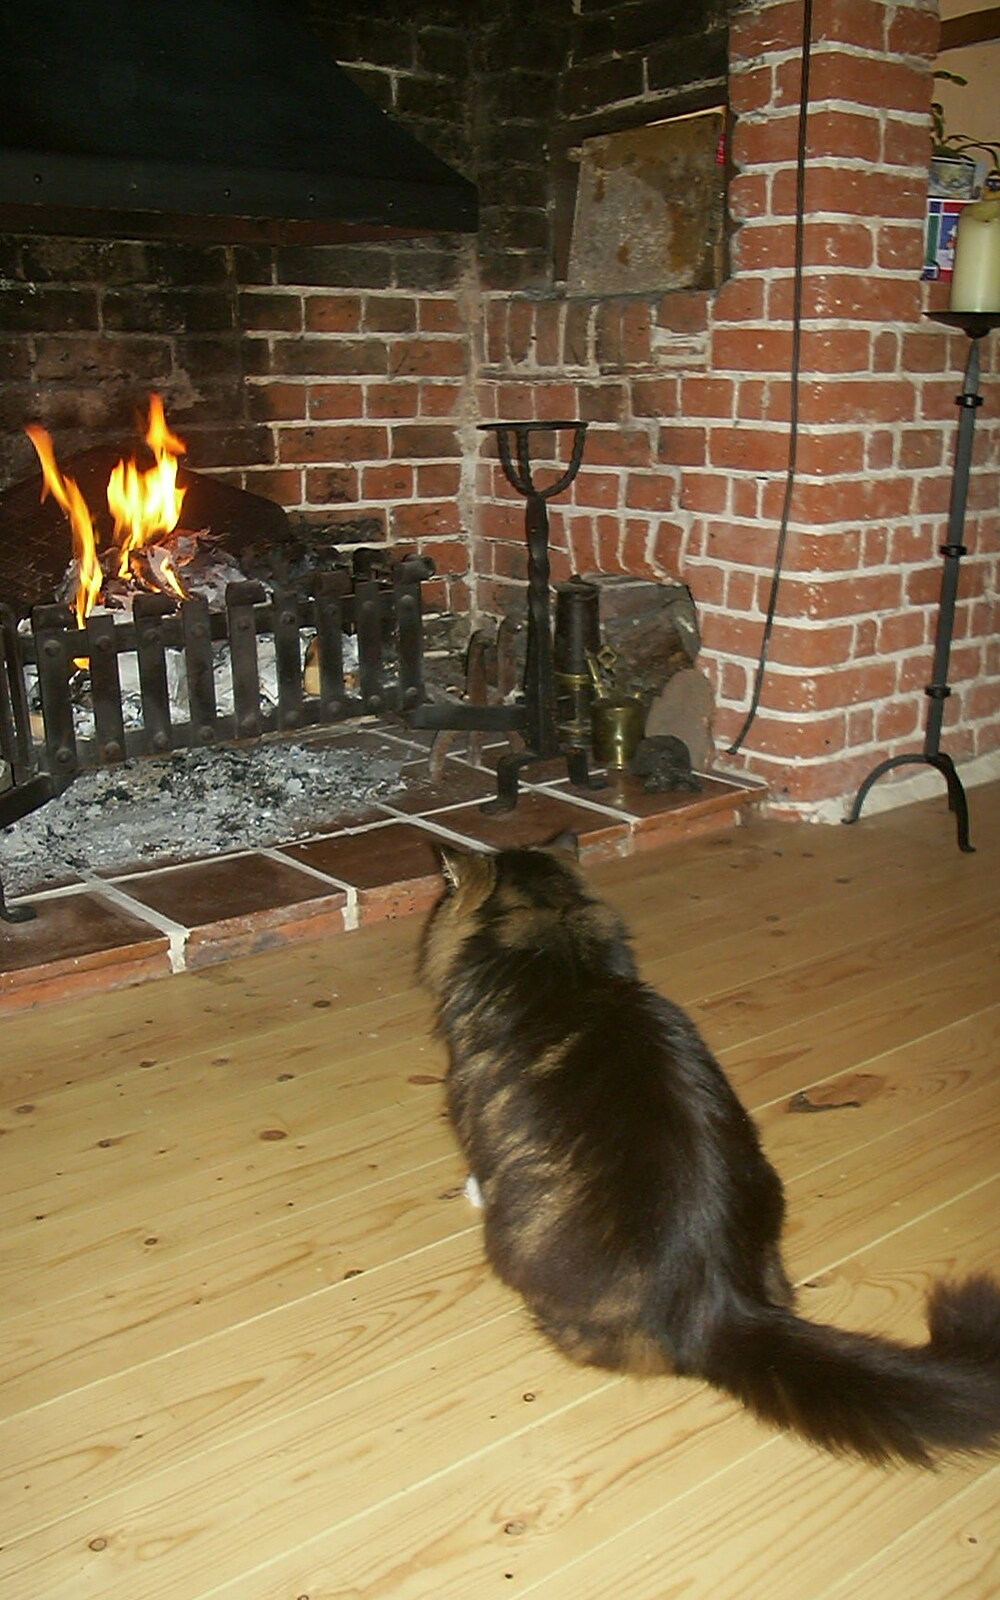 Sophie sits in front of the fire from The House in Snow and a Carburettor, Brome, Suffolk - 20th December 2002